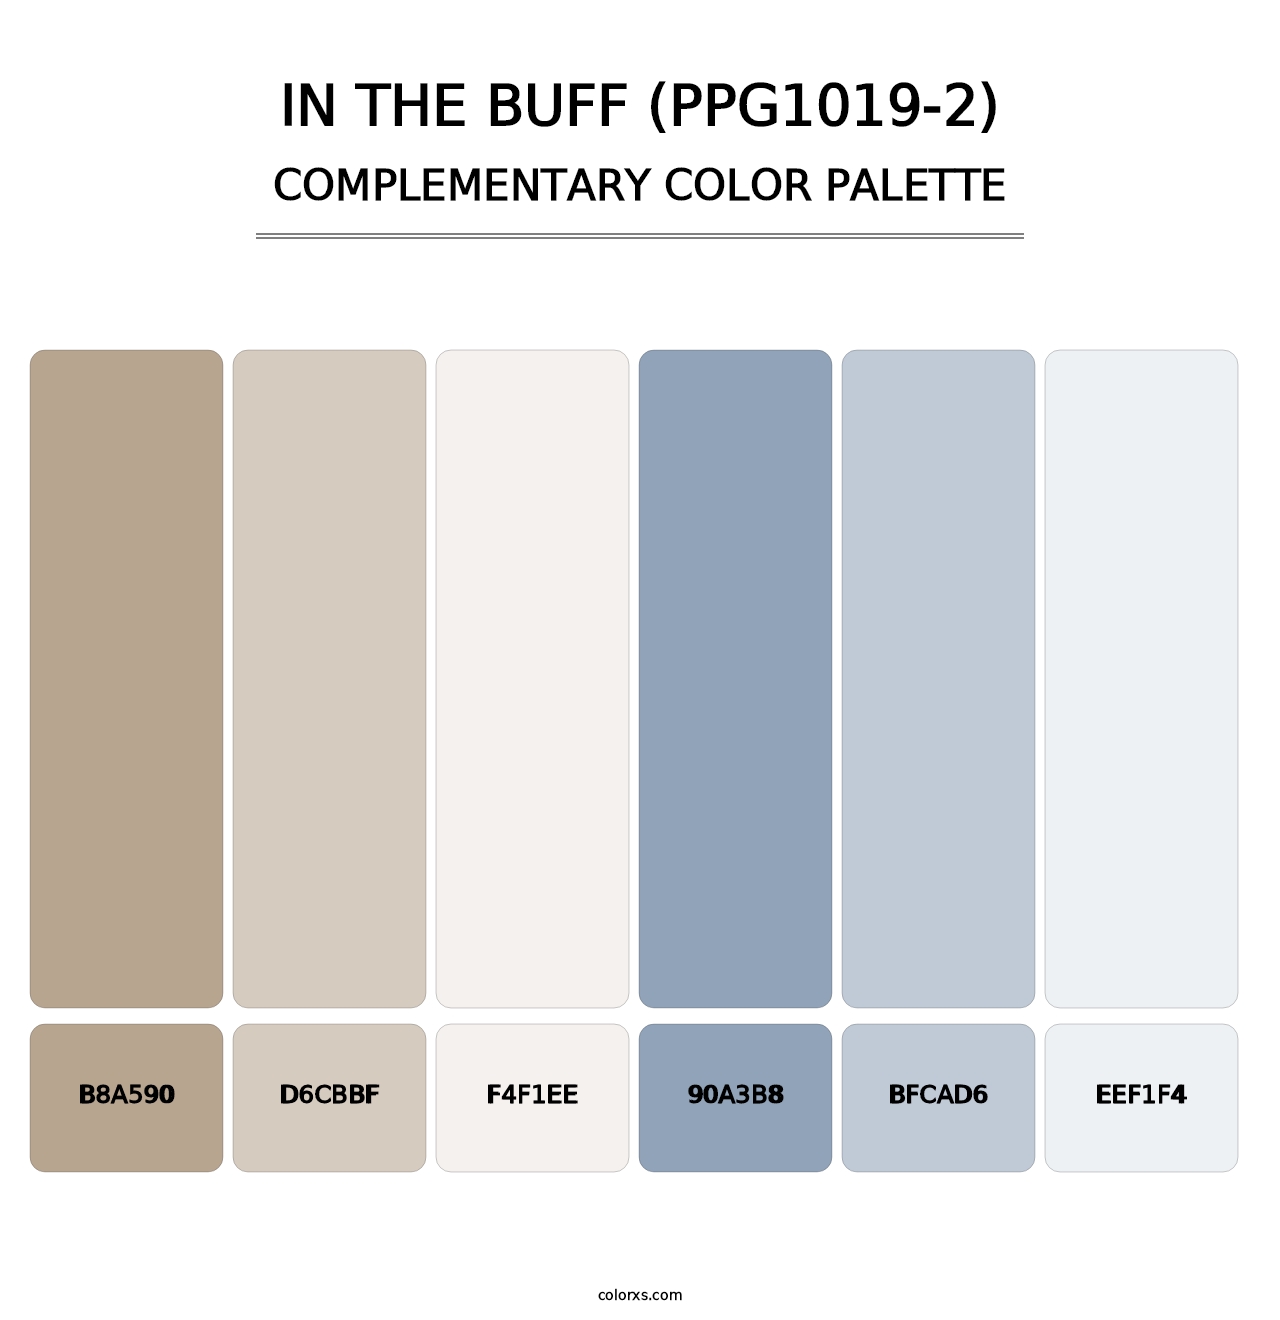 In The Buff (PPG1019-2) - Complementary Color Palette